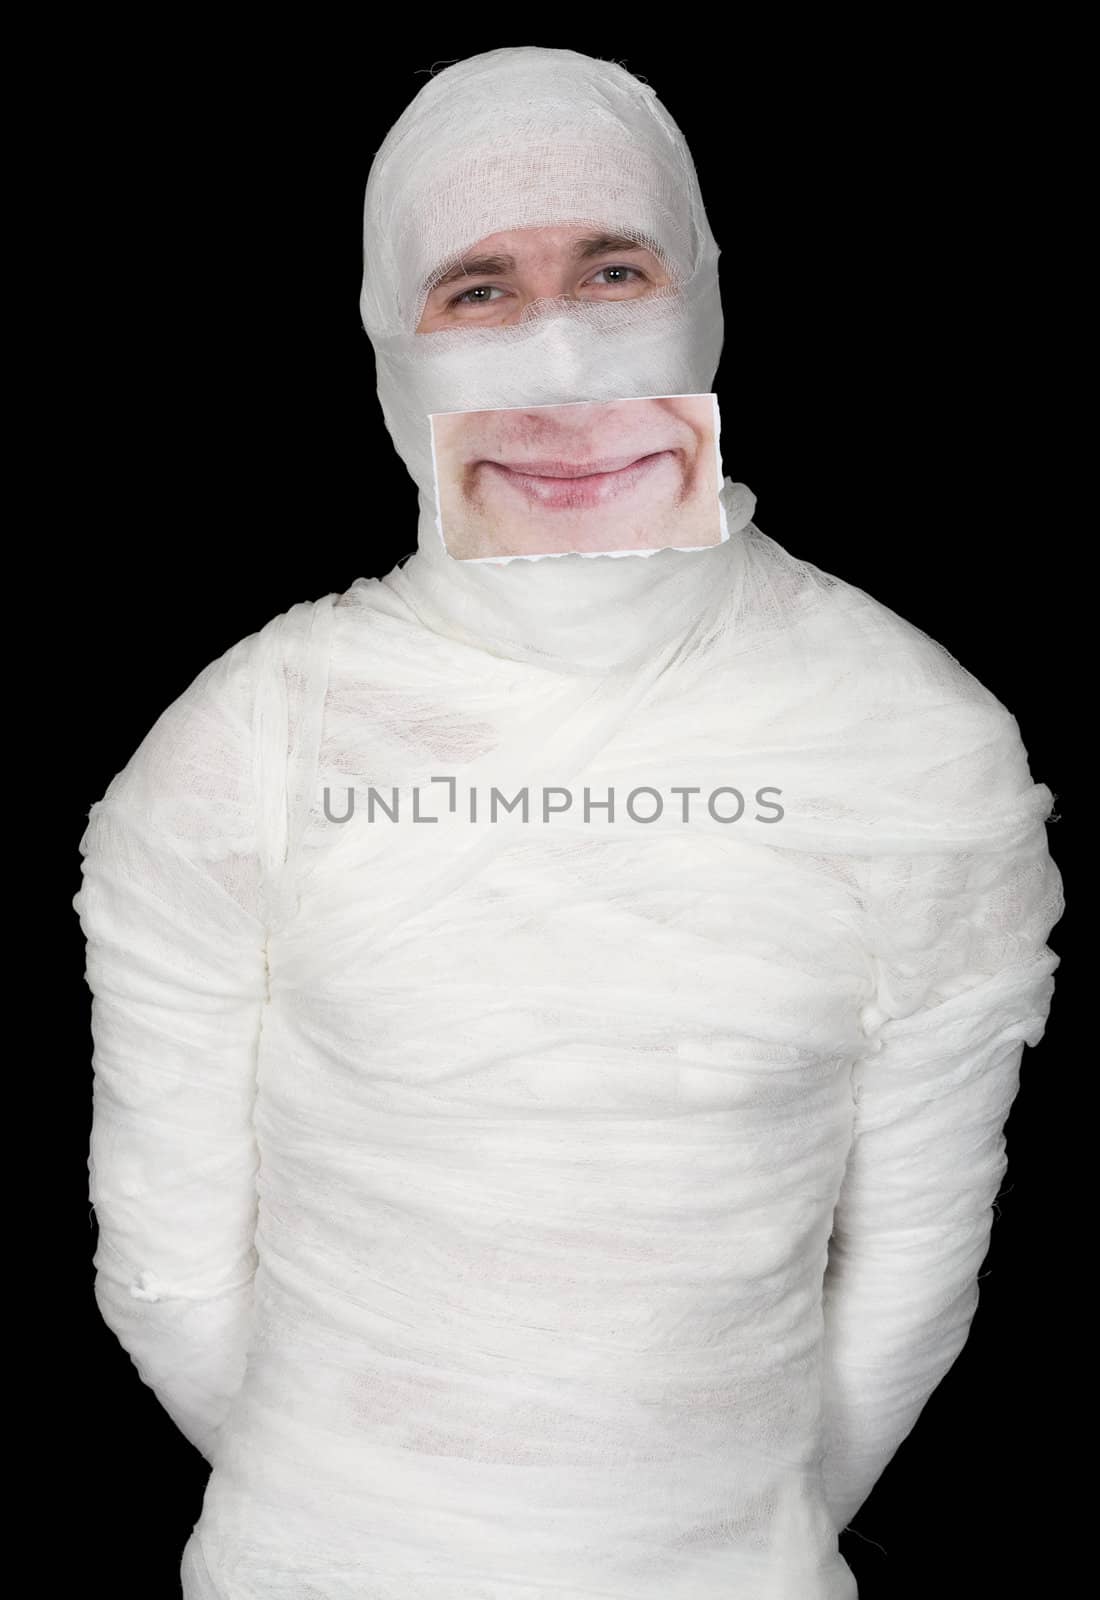 Guy in bandage with a false smile by pzaxe